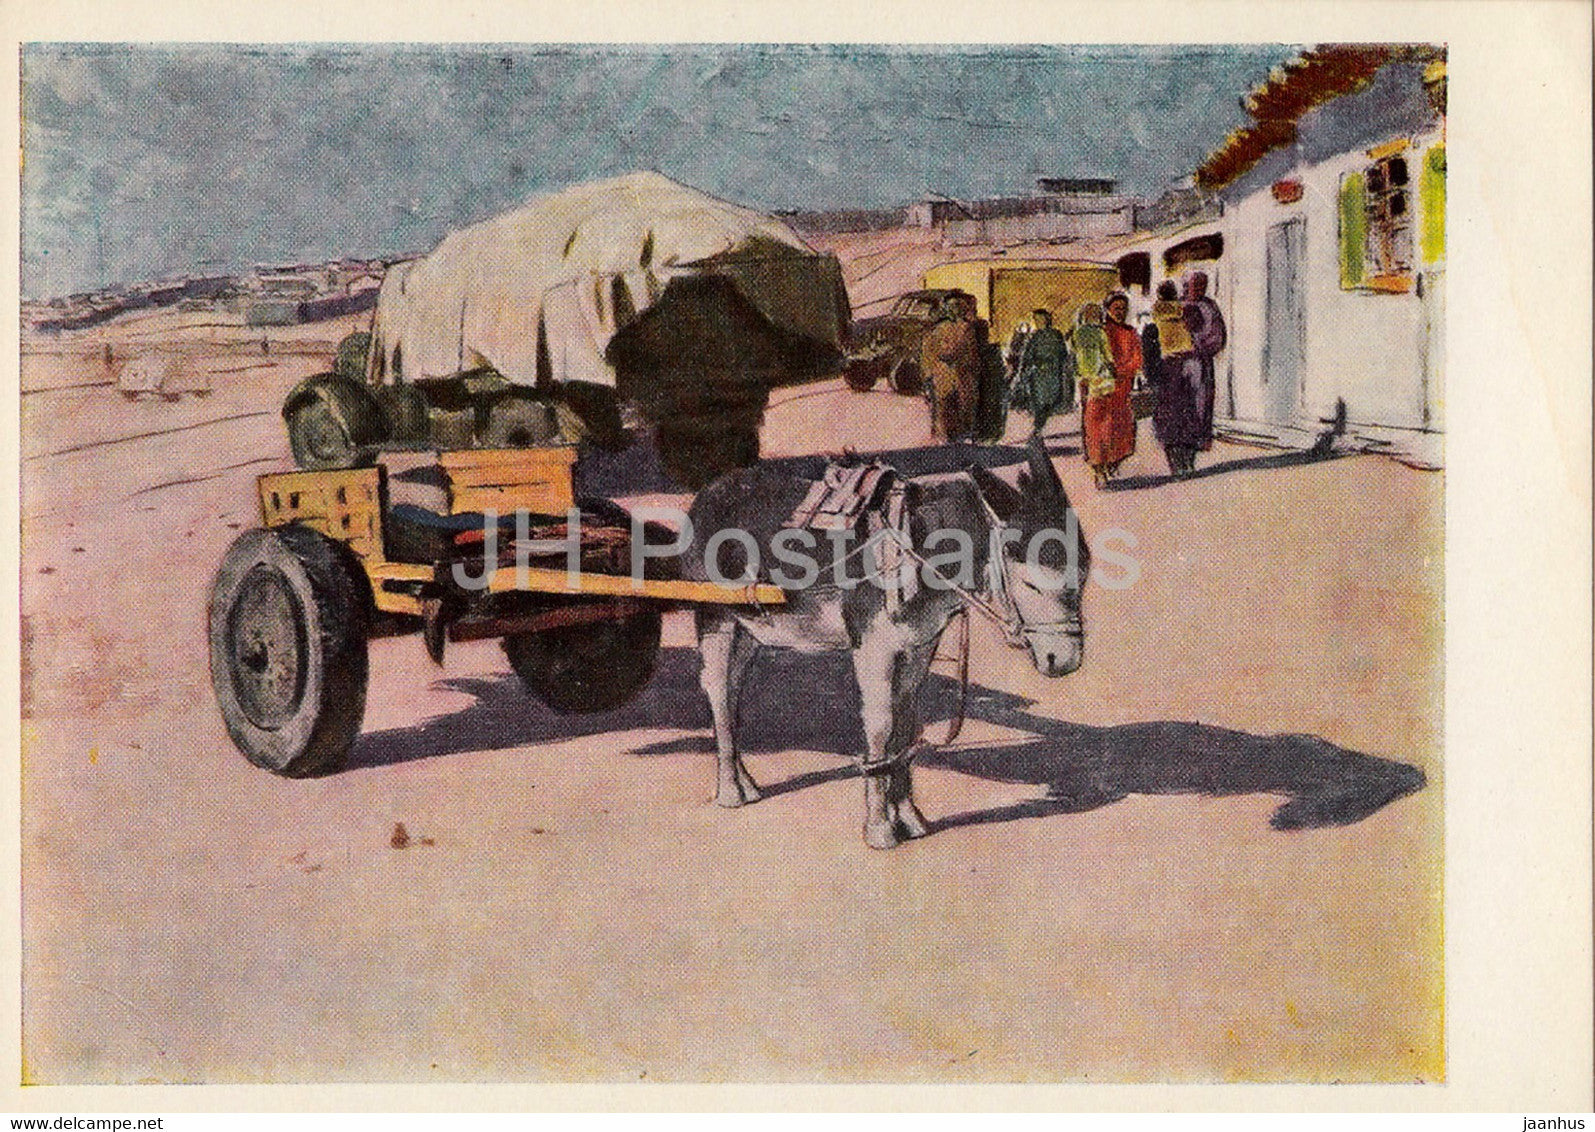 painting by A. Stroganov - Midday - donkey - Mongolian art - 1966 - Russia USSR - unused - JH Postcards